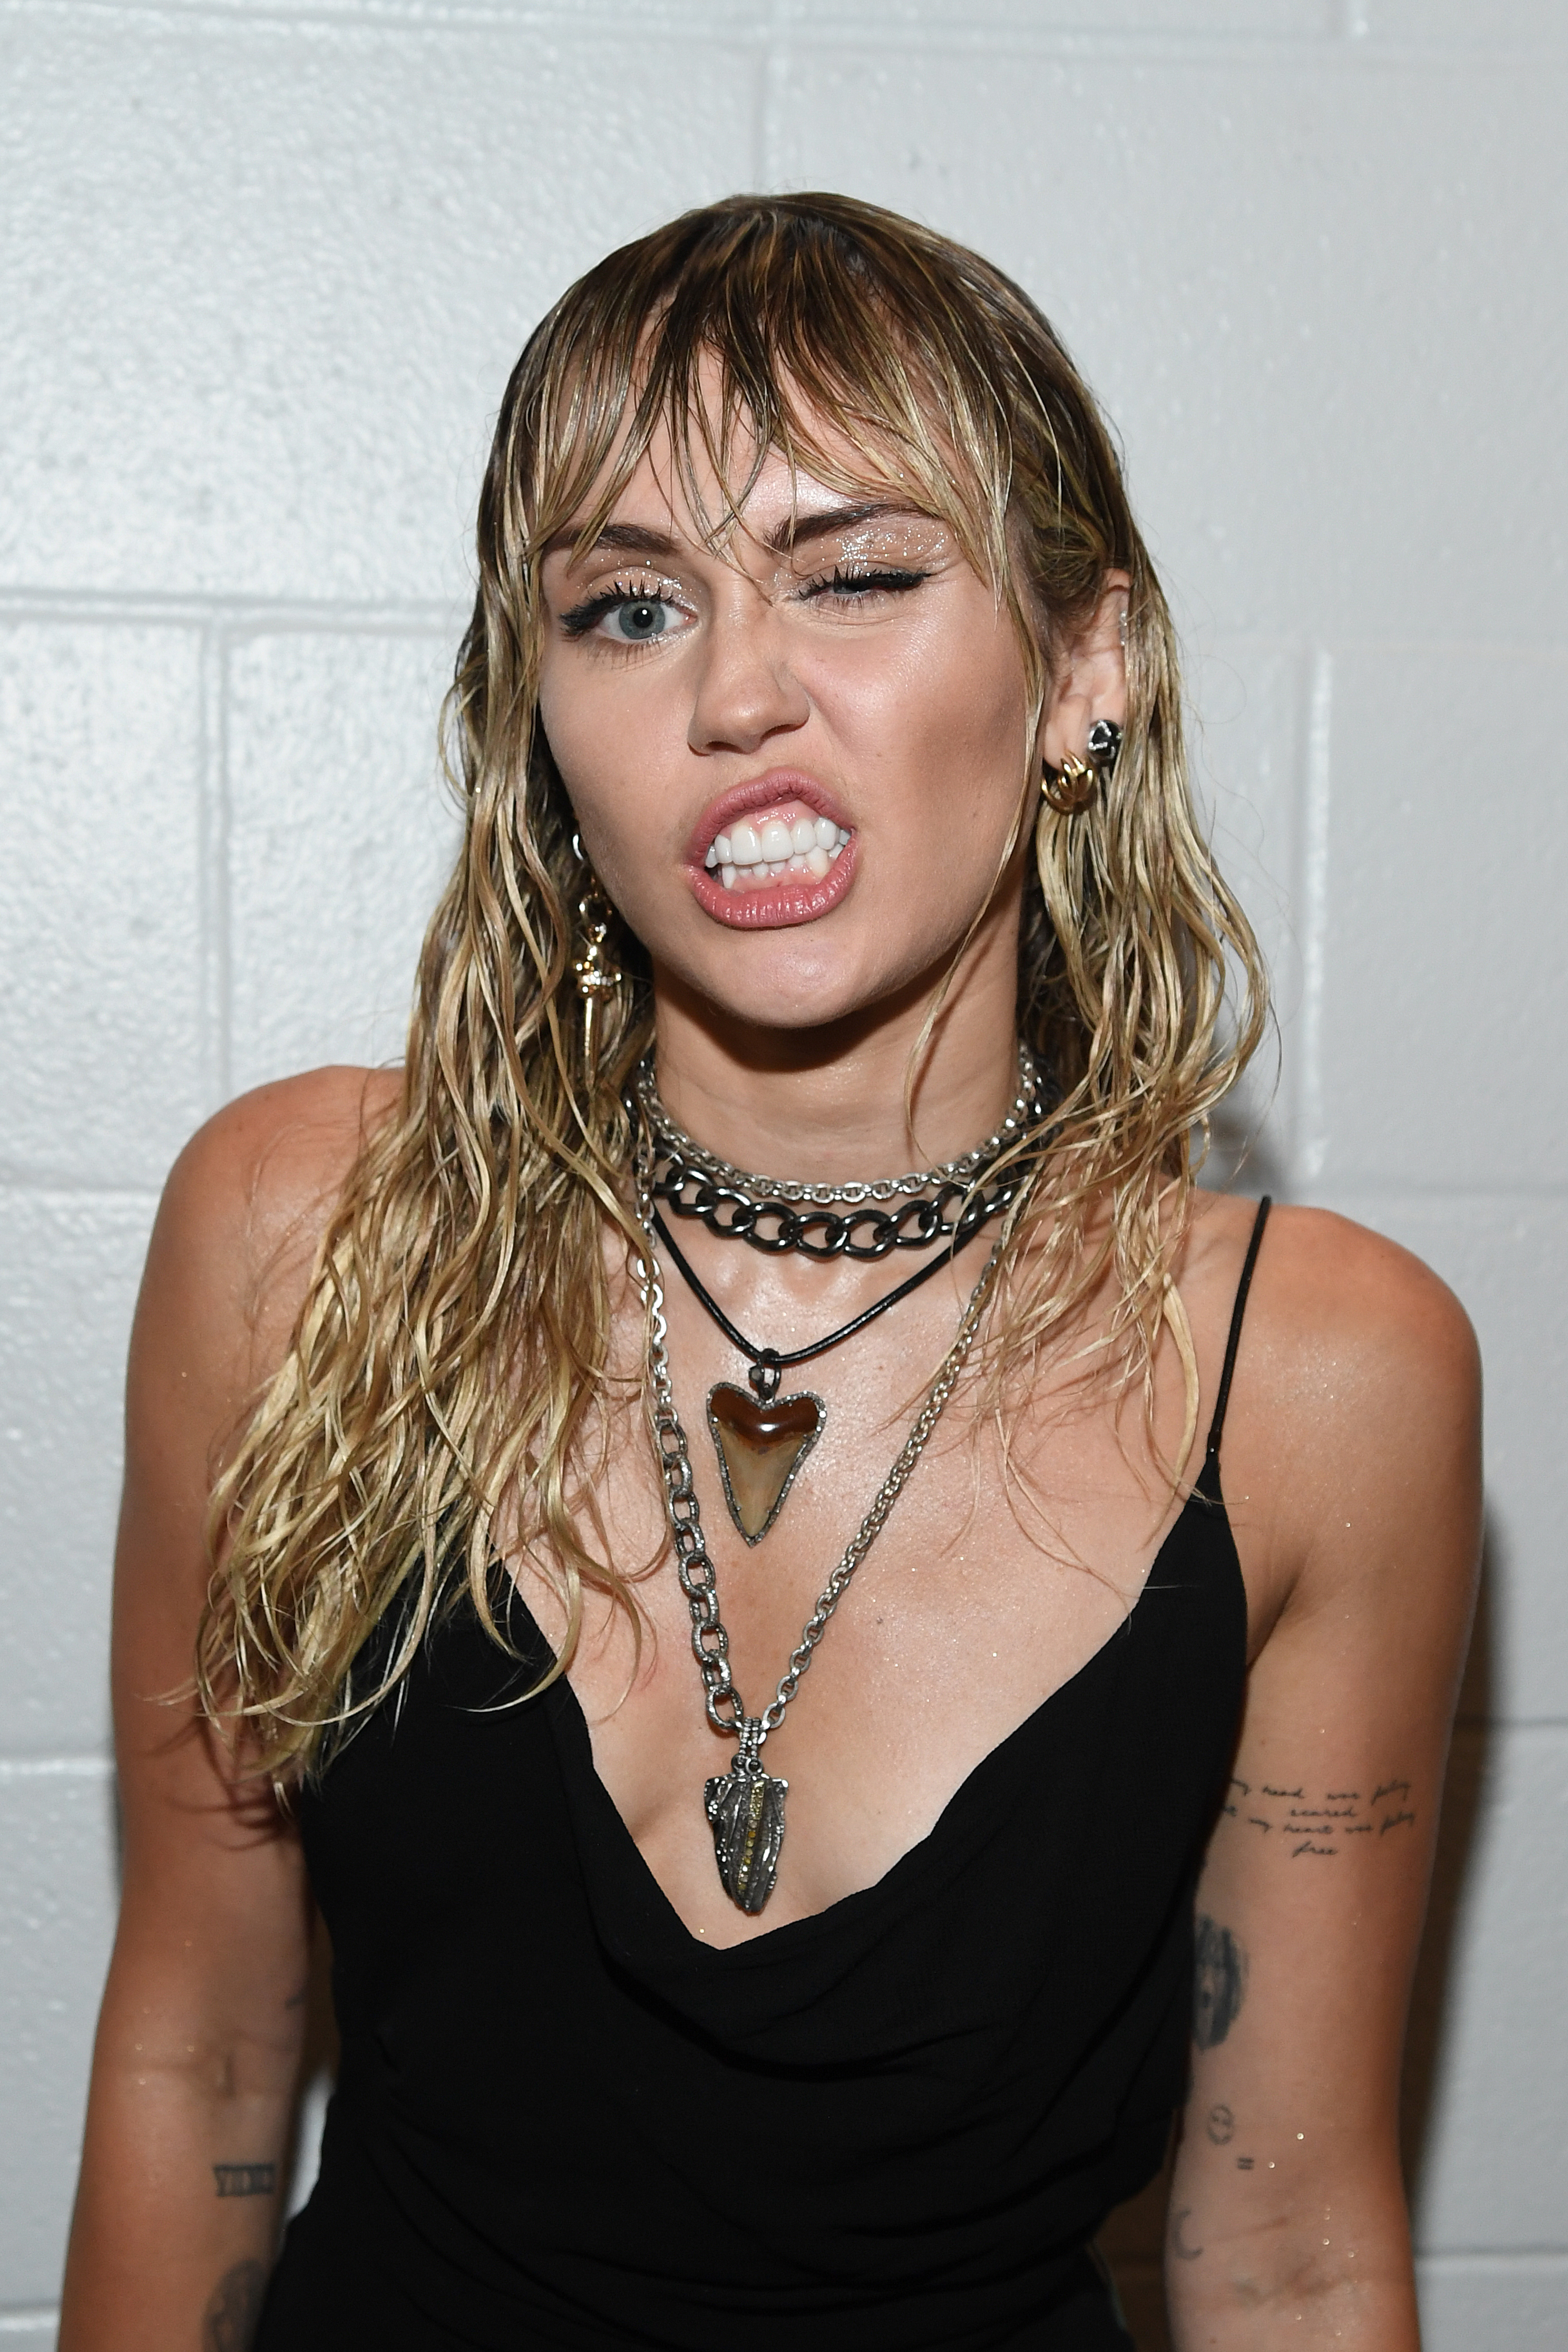 aaron clement recommends miley cyrus wet and ready pic